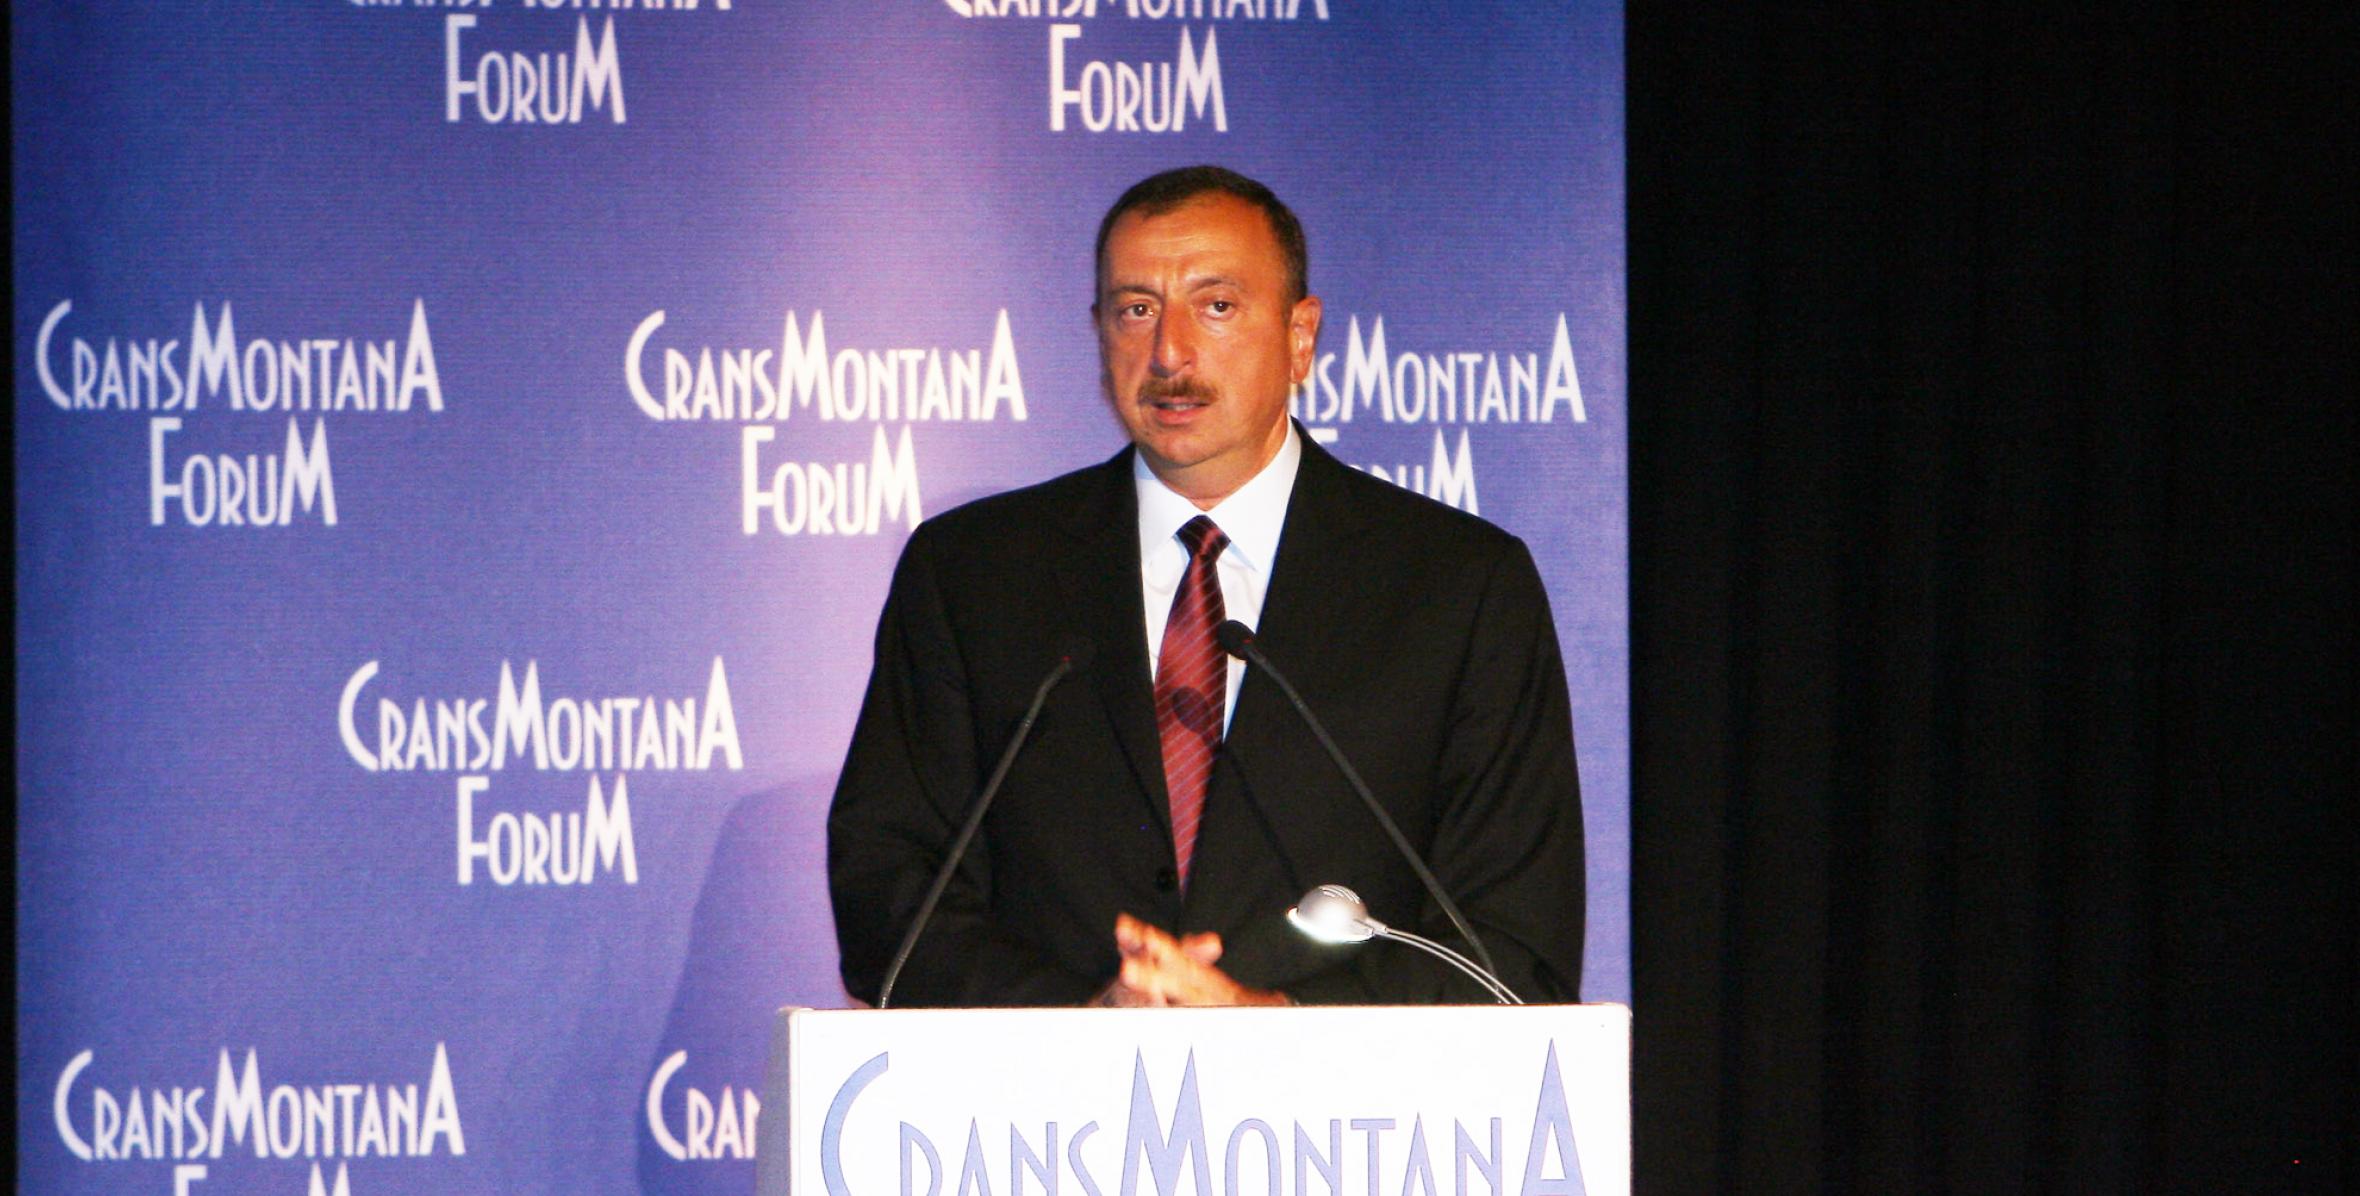 Ilham Aliyev participated in the official opening of the Crans Montana Forum